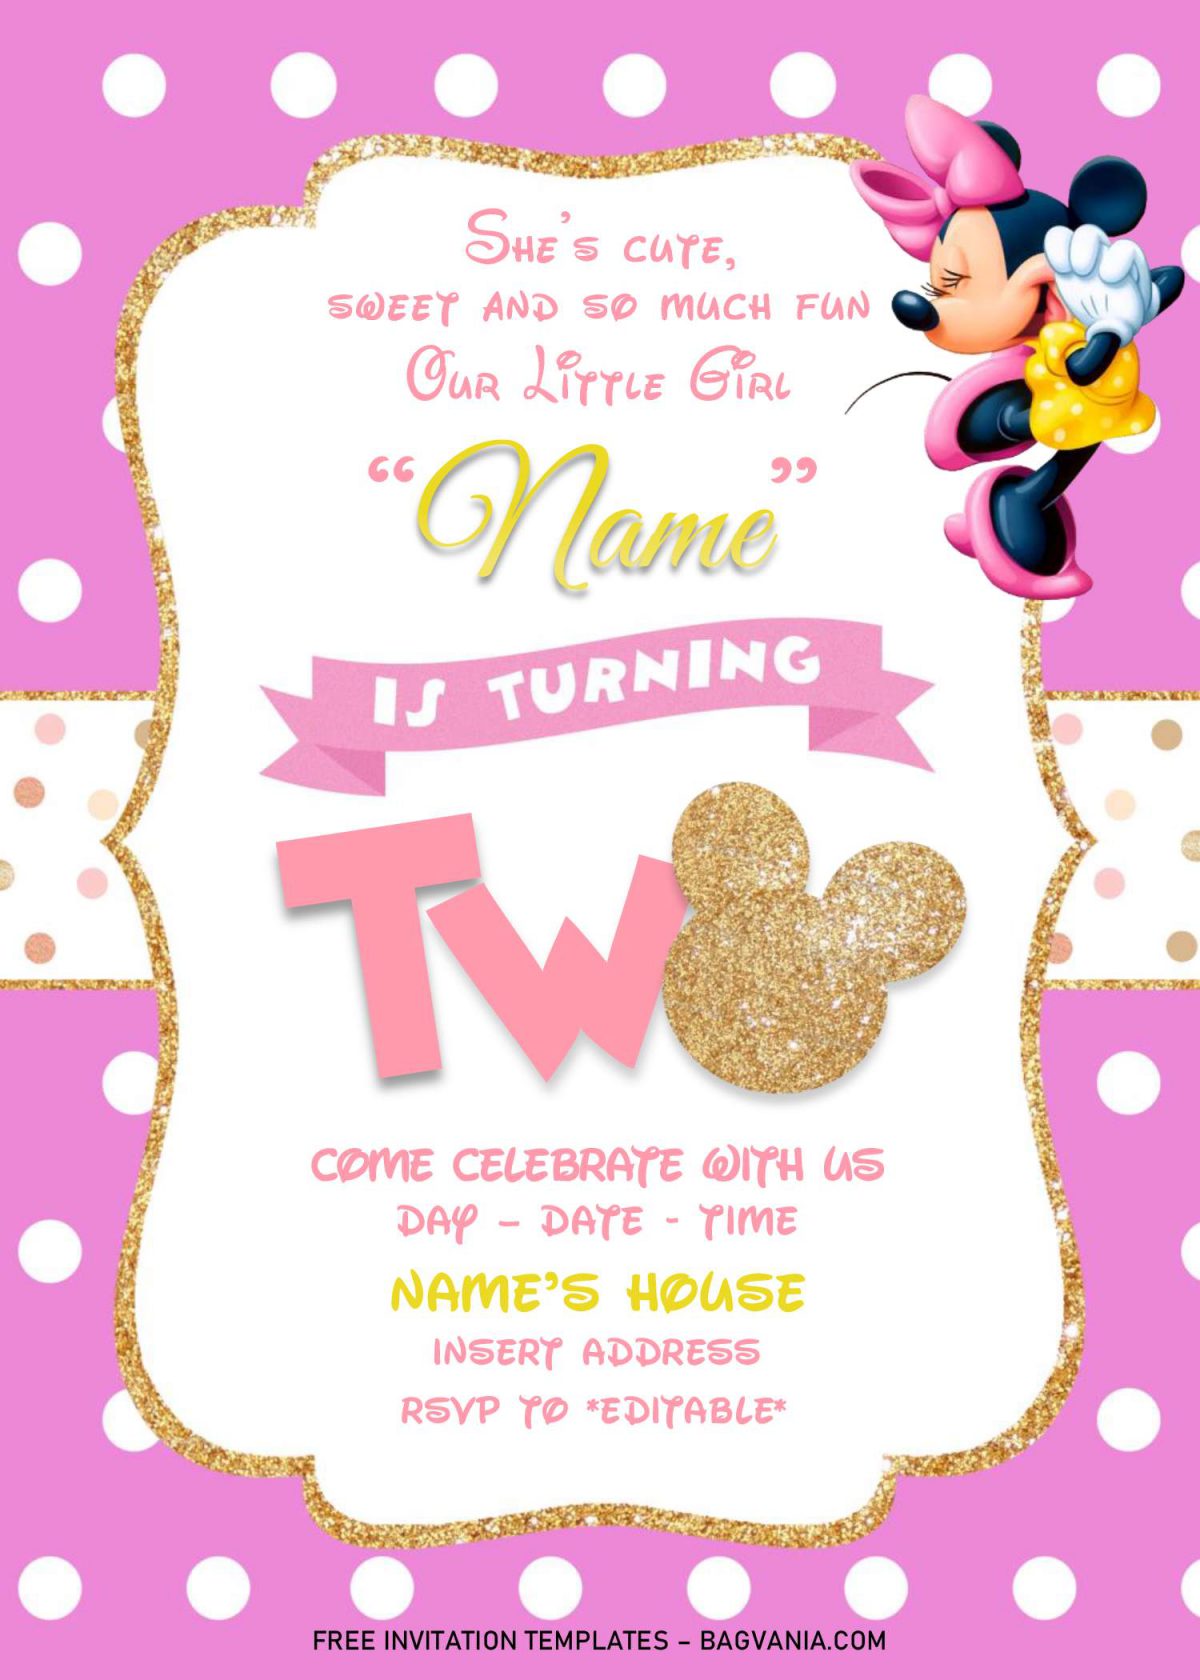 Gold Glitter Minnie Mouse Invitation Templates - Editable .Docx and has polka dots pattern